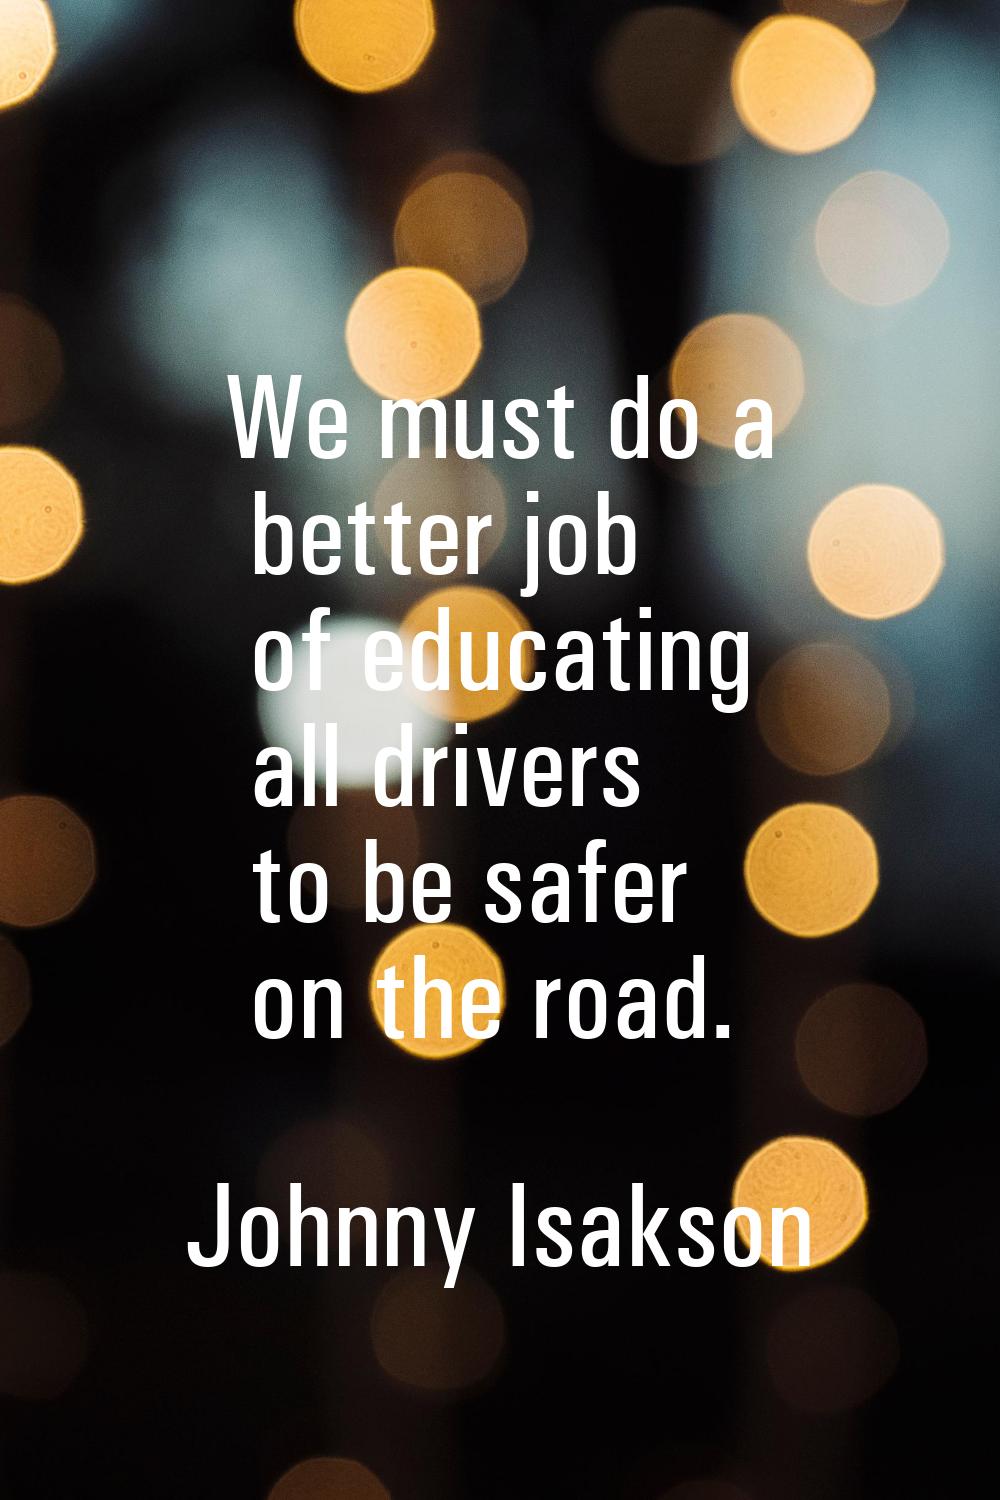 We must do a better job of educating all drivers to be safer on the road.